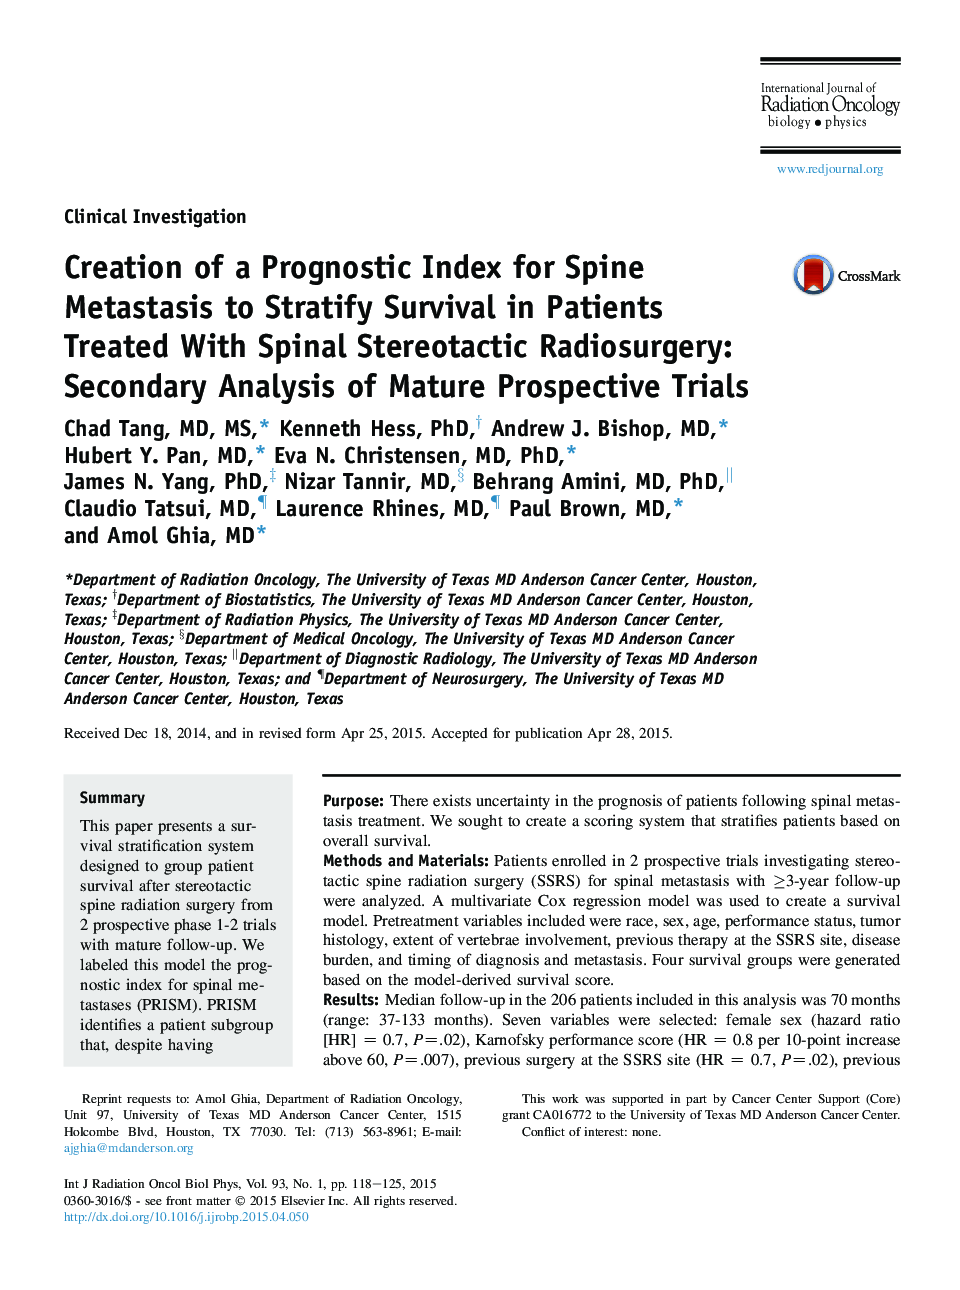 Creation of a Prognostic Index for Spine Metastasis to Stratify Survival in Patients Treated With Spinal Stereotactic Radiosurgery: Secondary Analysis of Mature Prospective Trials